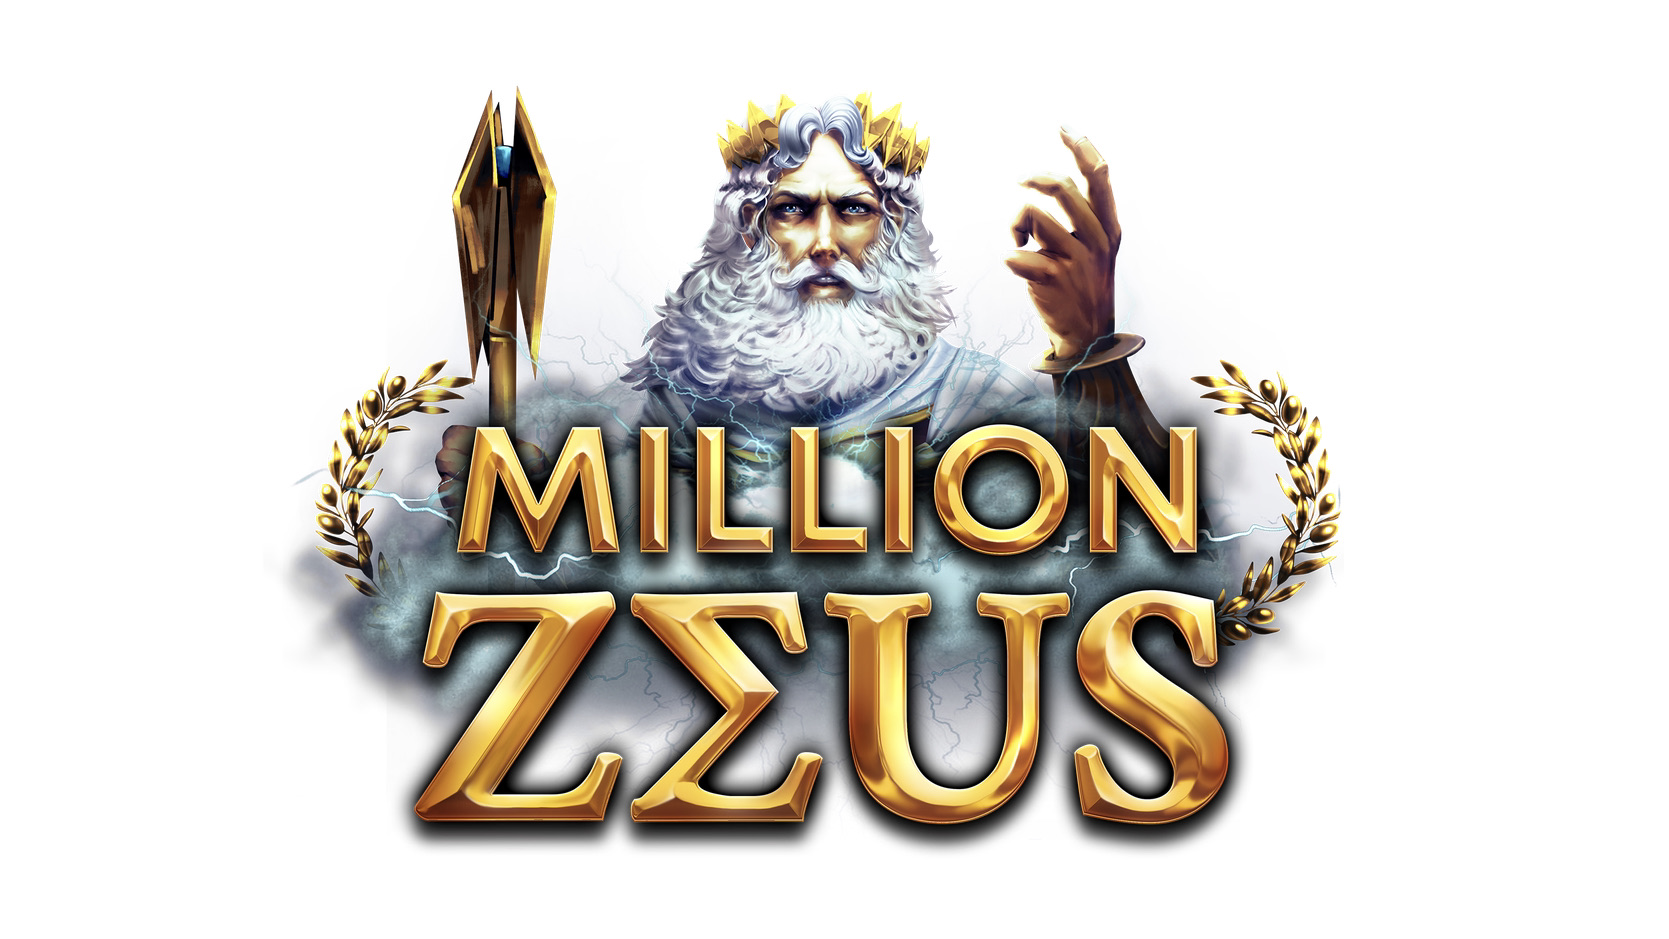 Million Zeus is a 6x10, 1,000,000-payline video slot that comes with a maximum win potential of up to x10,000 the bet.